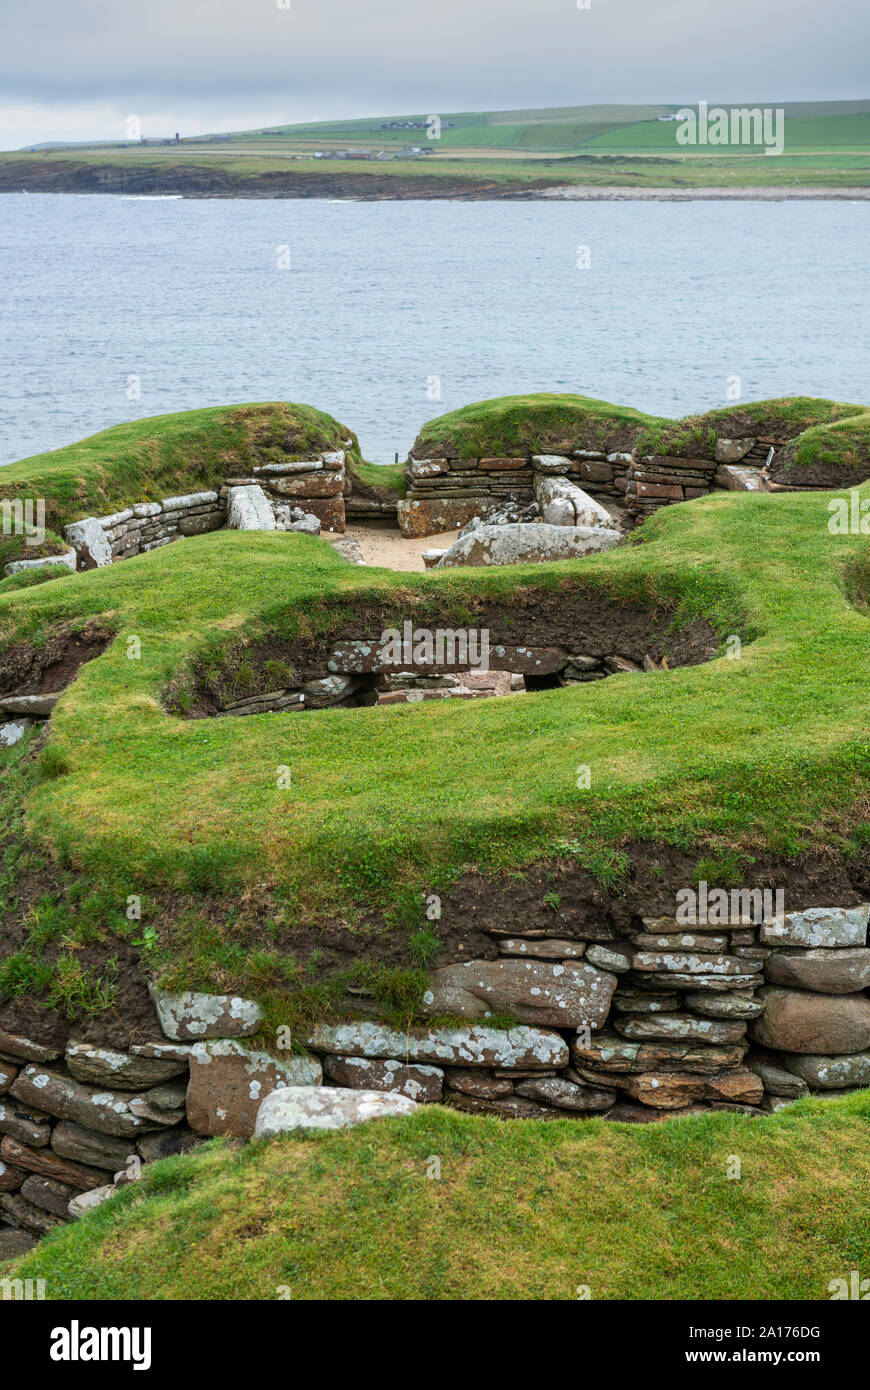 Skara Brae, a stone-built Neolithic village located on the Bay of Skaill on the west coast of the Orkney Islands in Scotland. Stock Photo